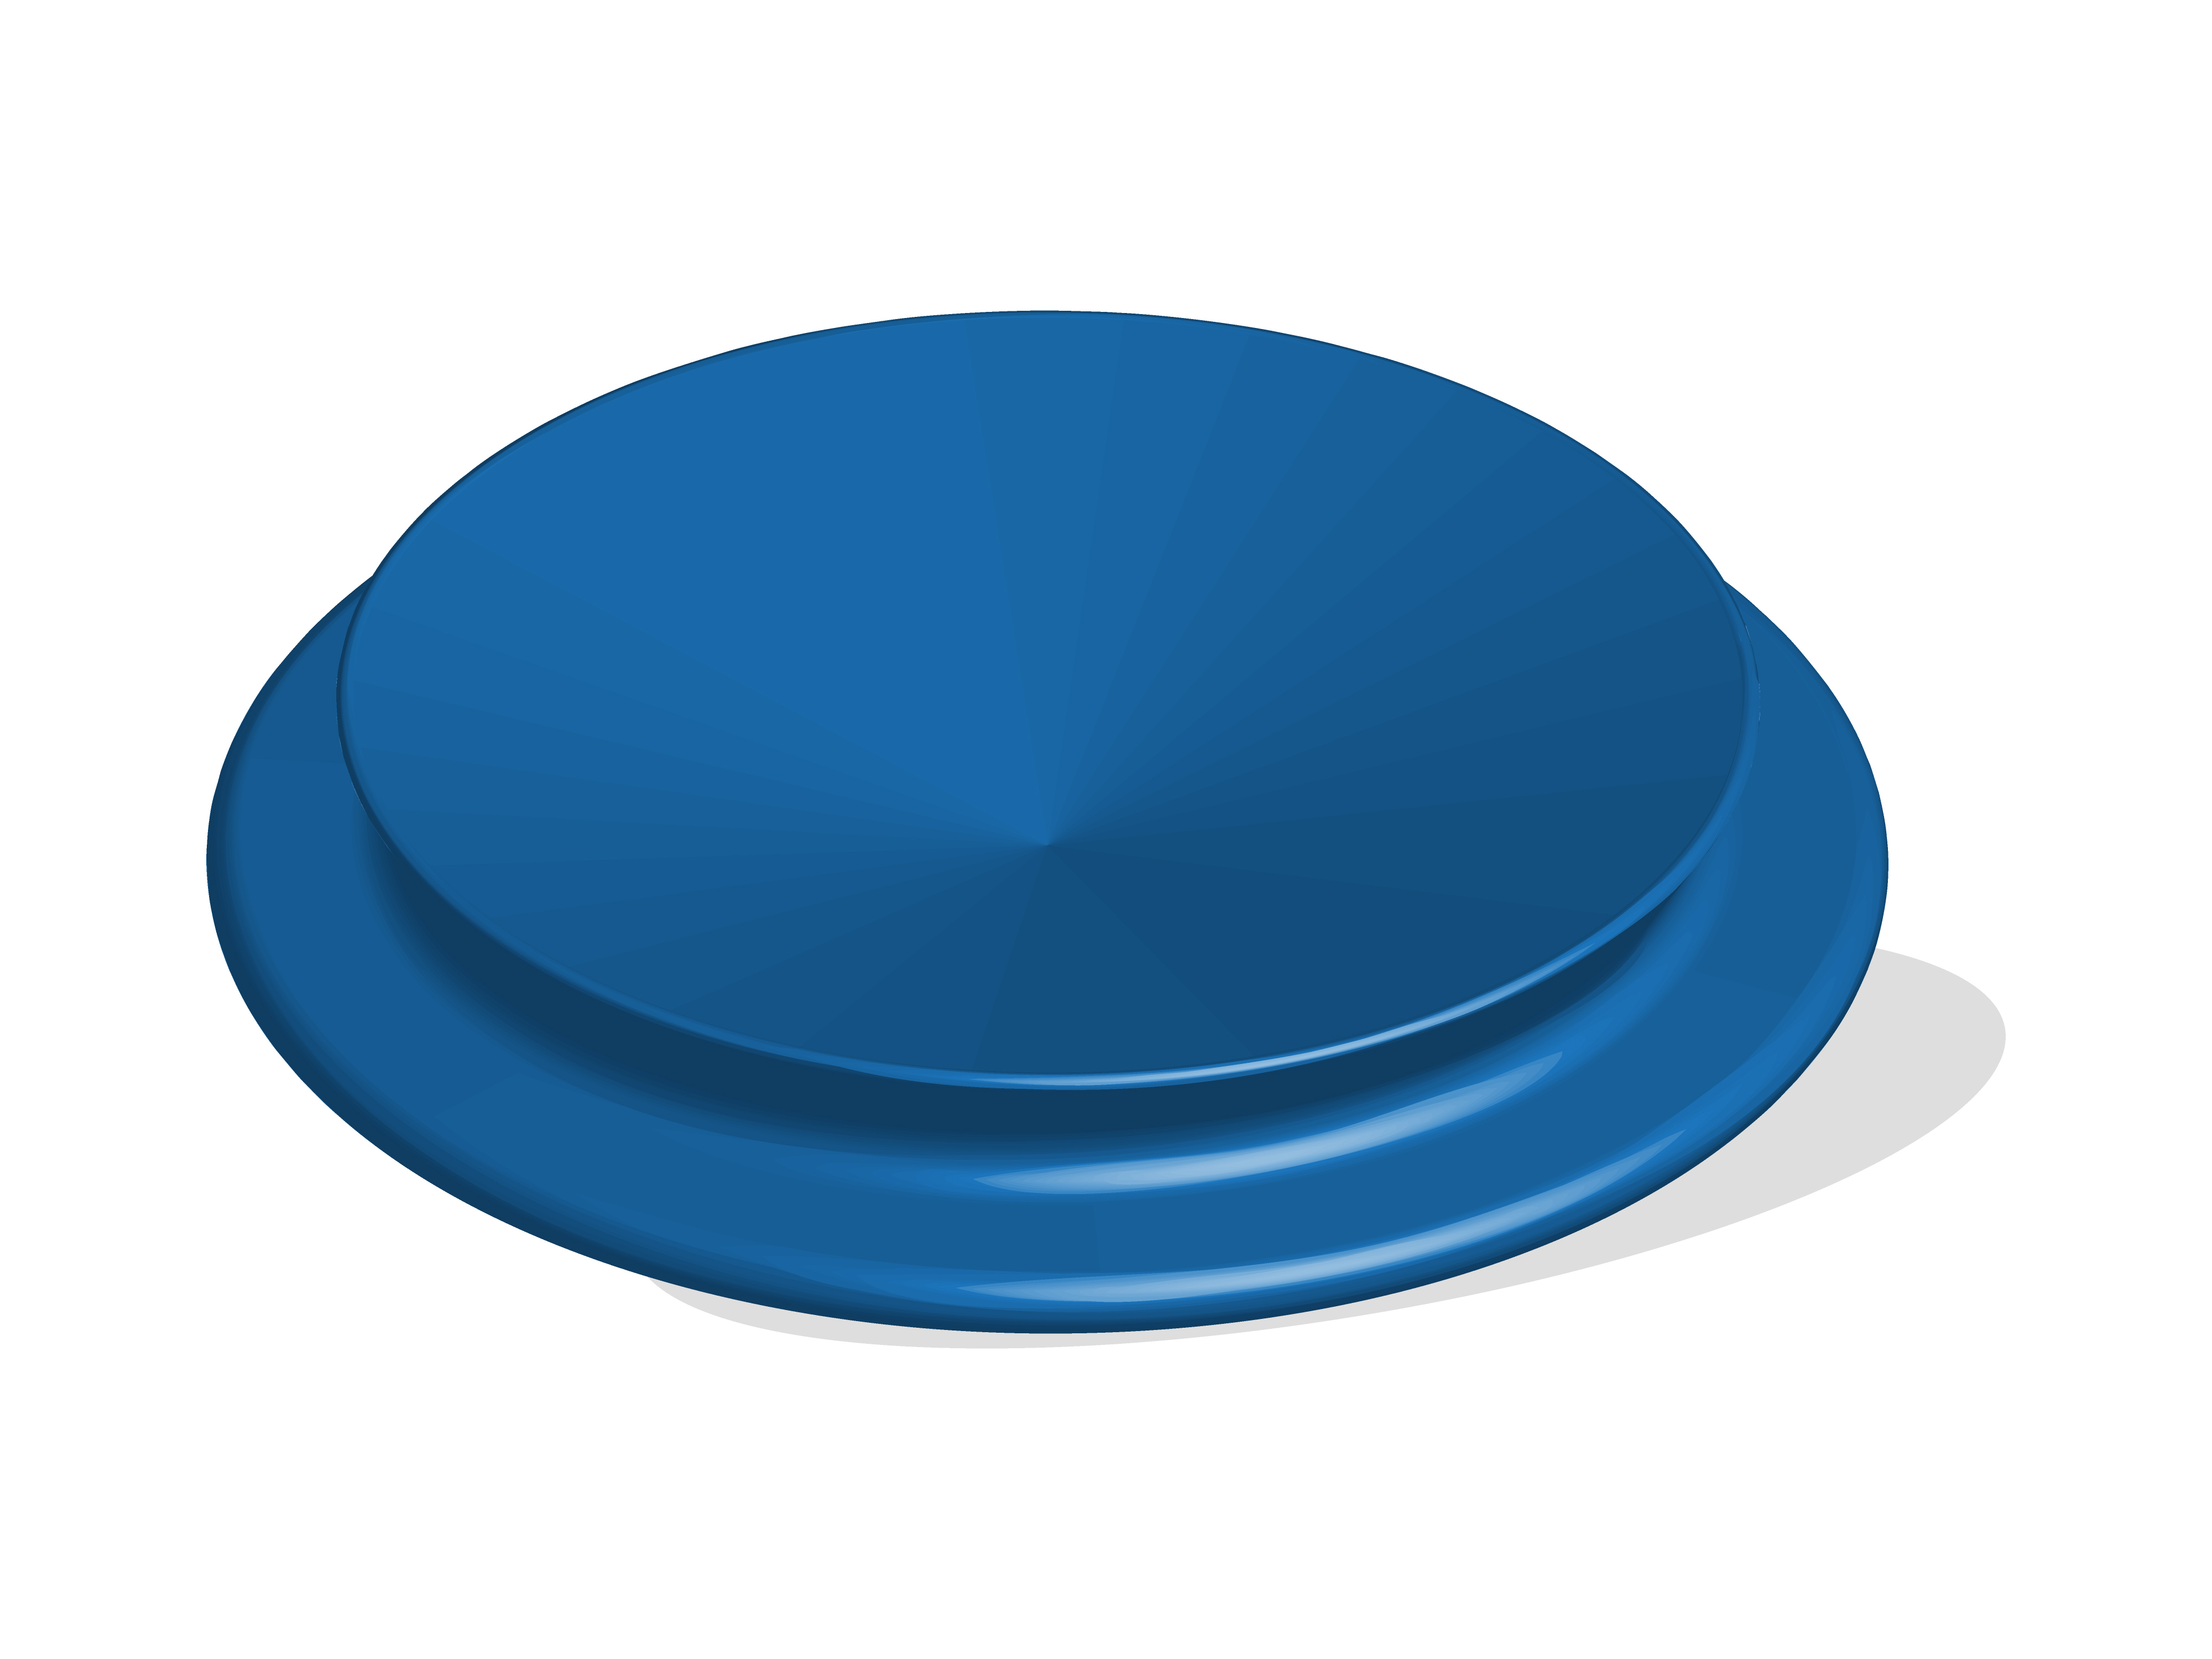 Blue frisbee sitting on top of a white surface.